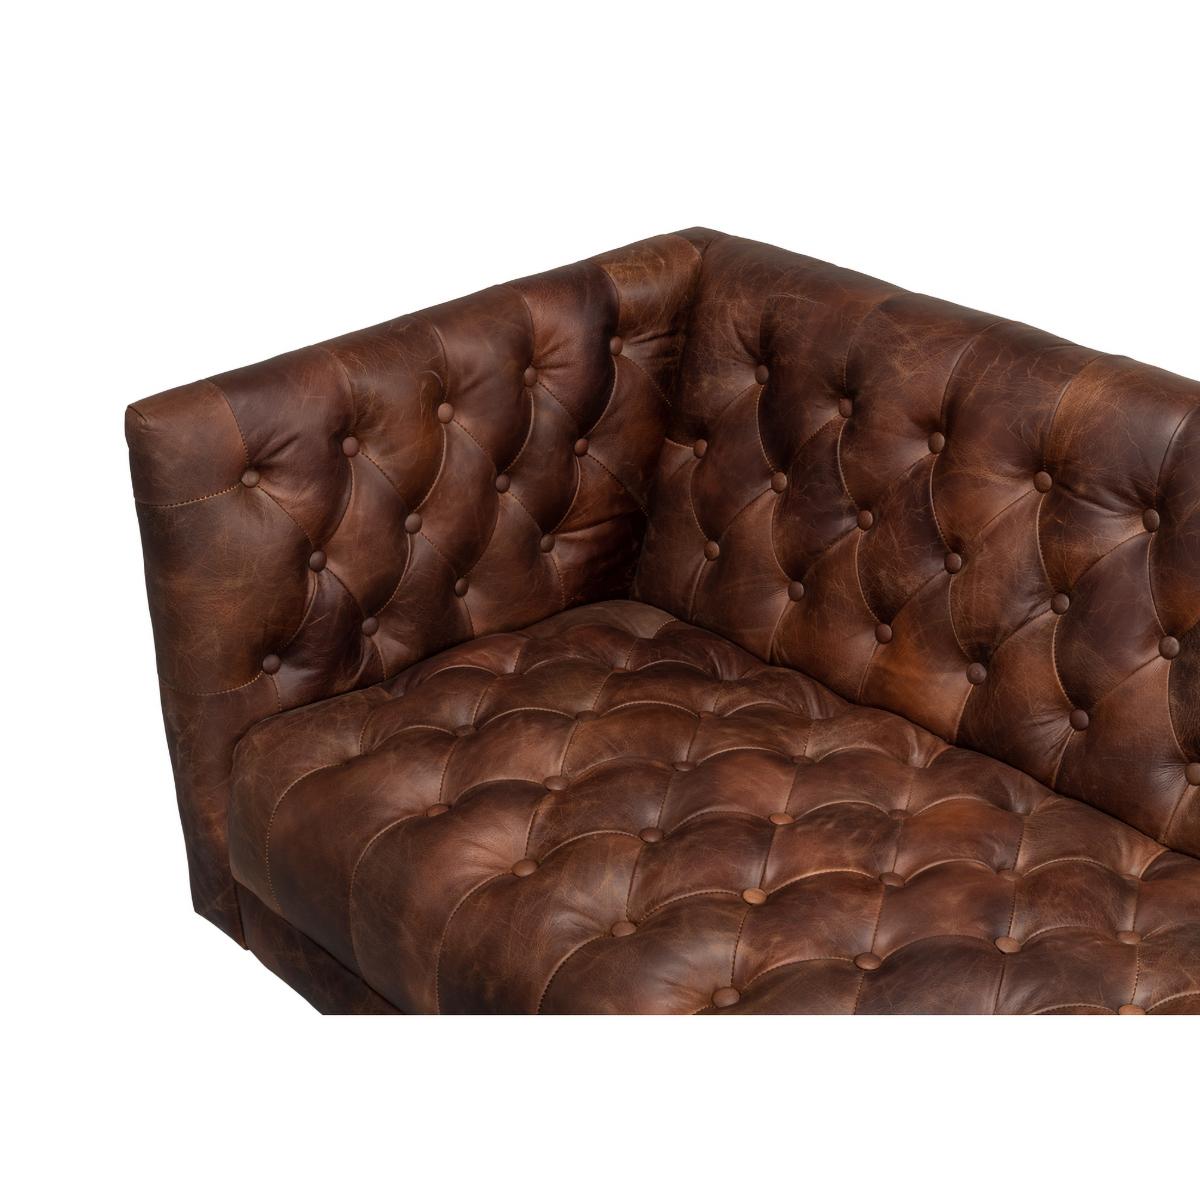 vintage tufted leather couch